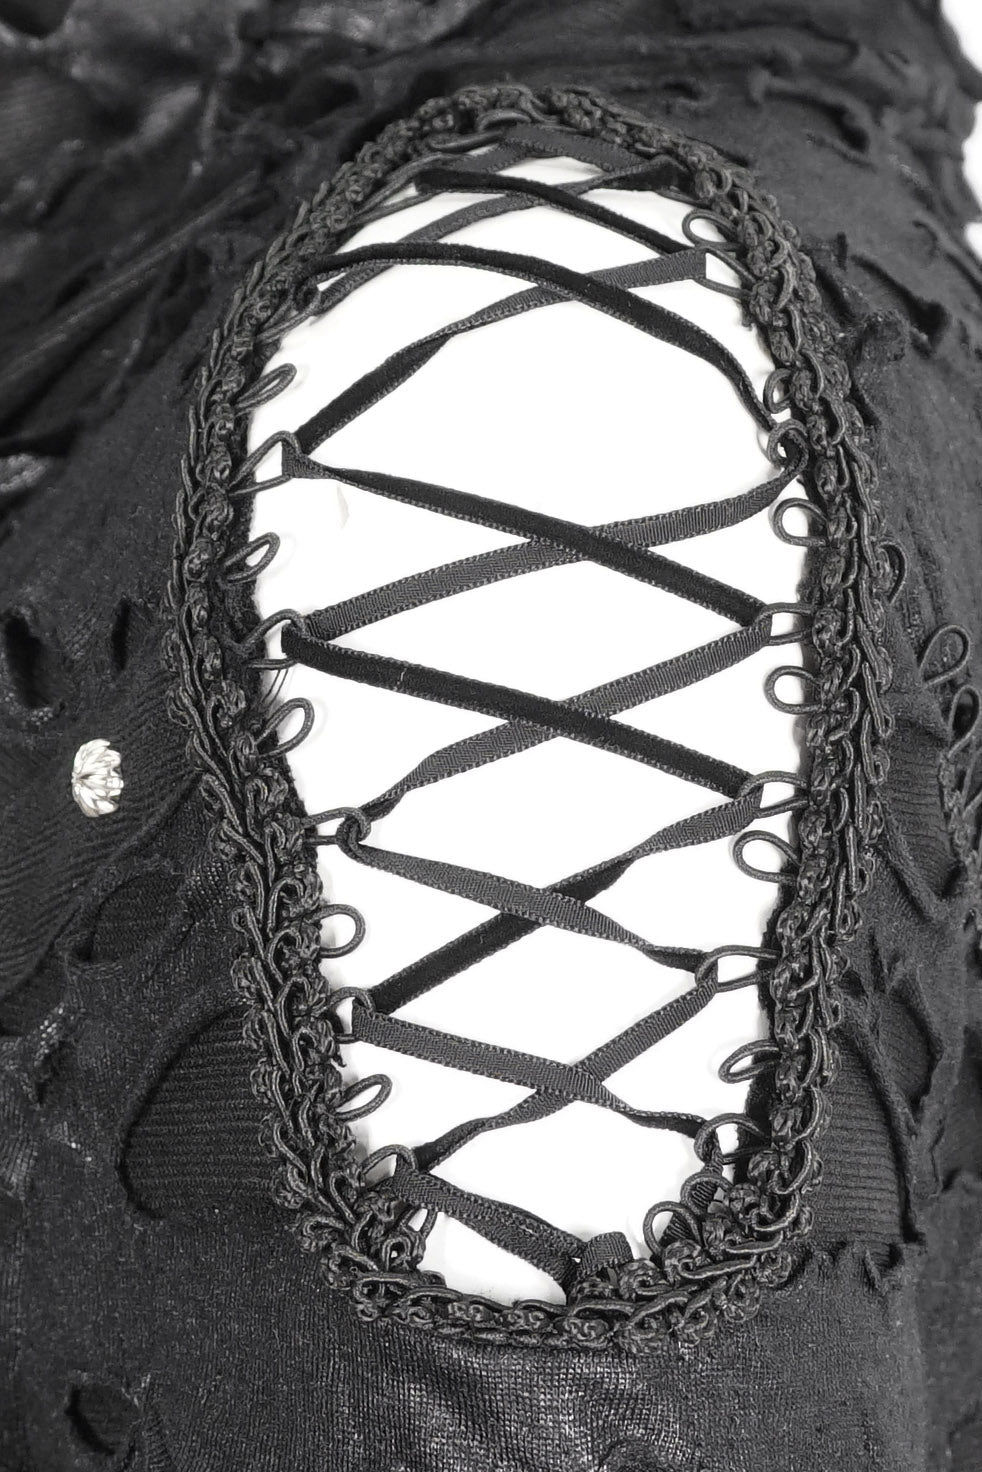 occult distressed lace-up dress